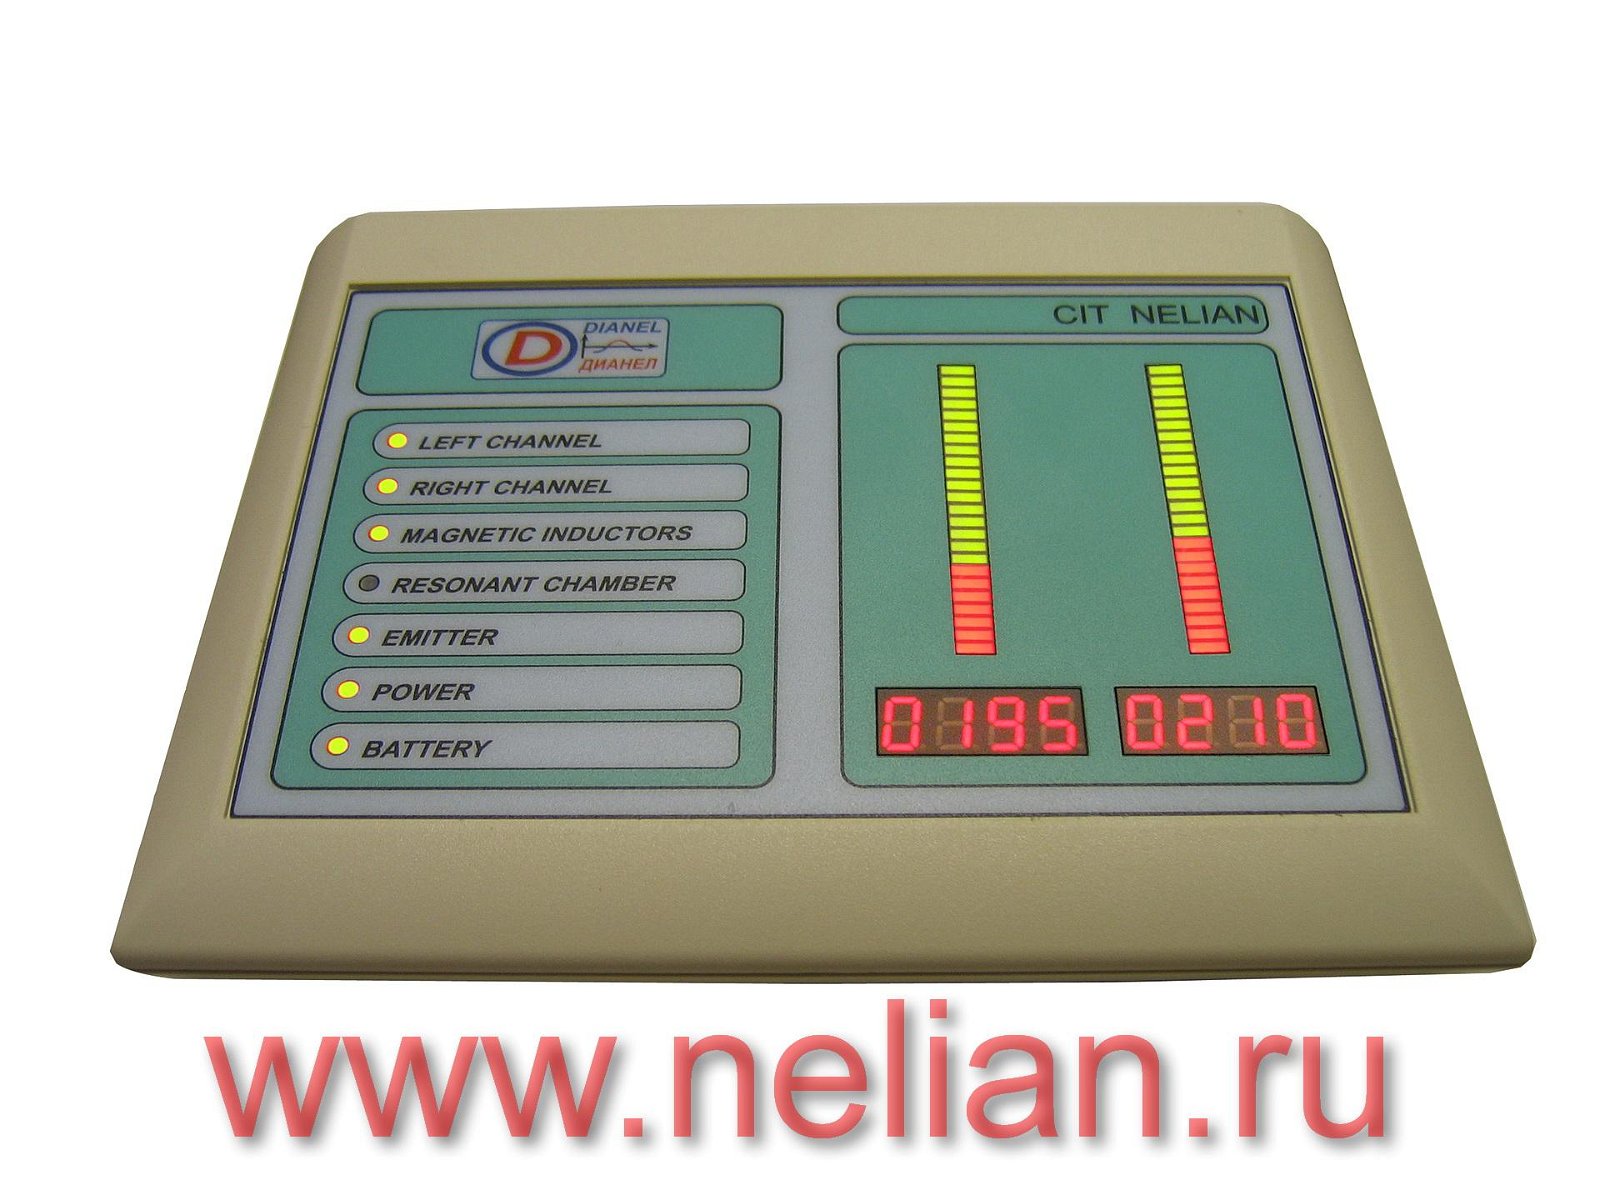 Dianel®11S-iON with software Dianel®-iON for psychophysiological testing 2